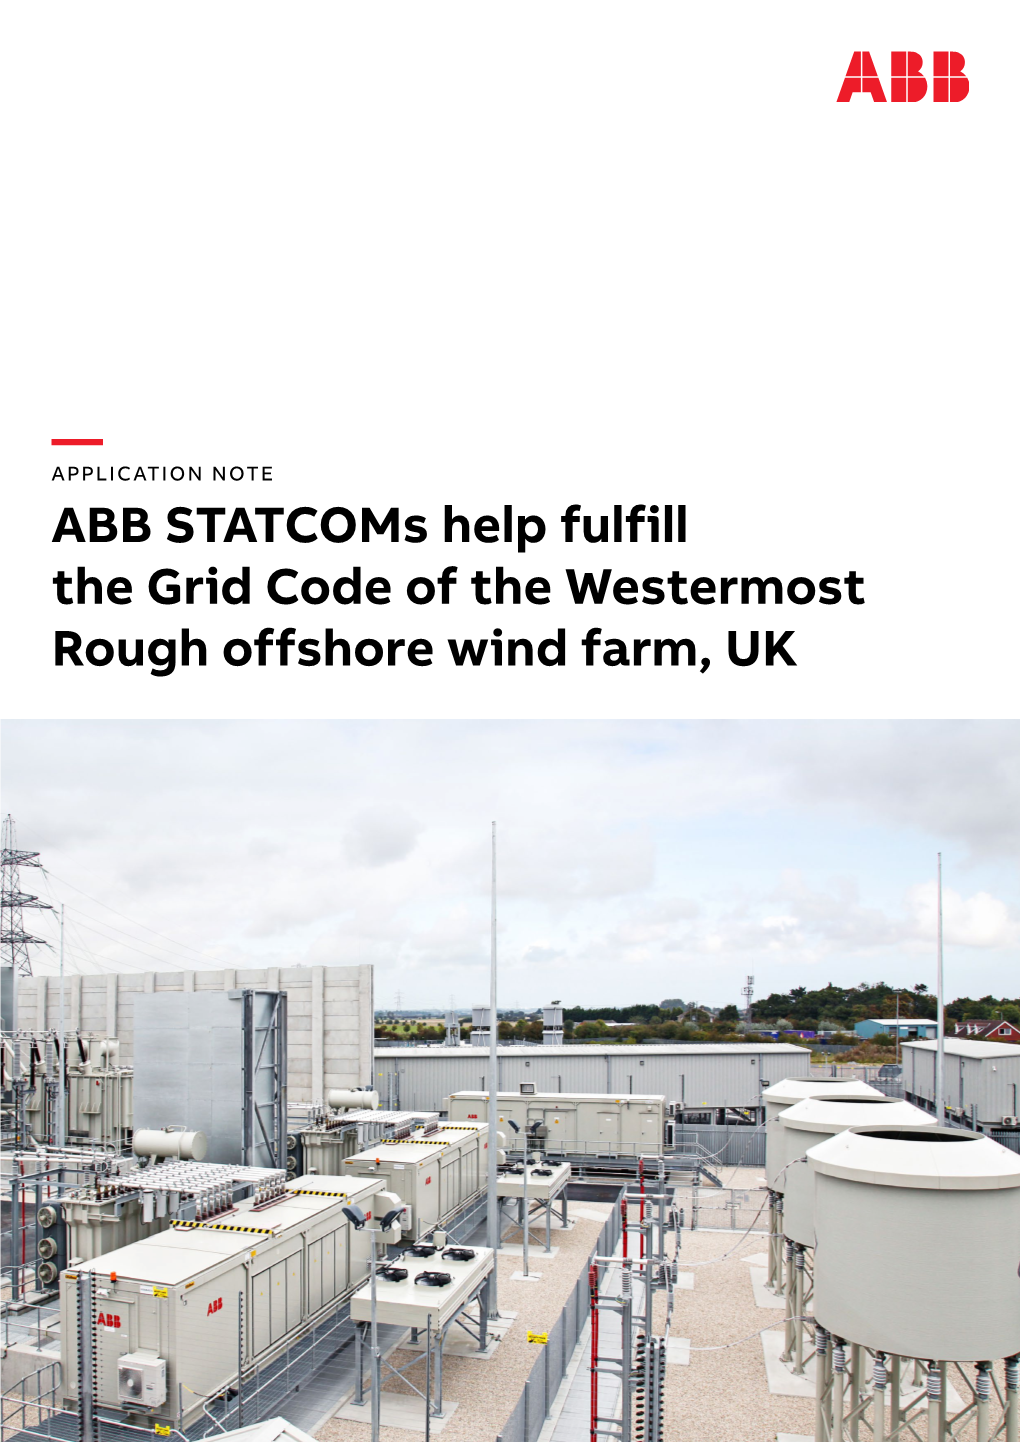 — ABB Statcoms Help Fulfill the Grid Code of the Westermost Rough